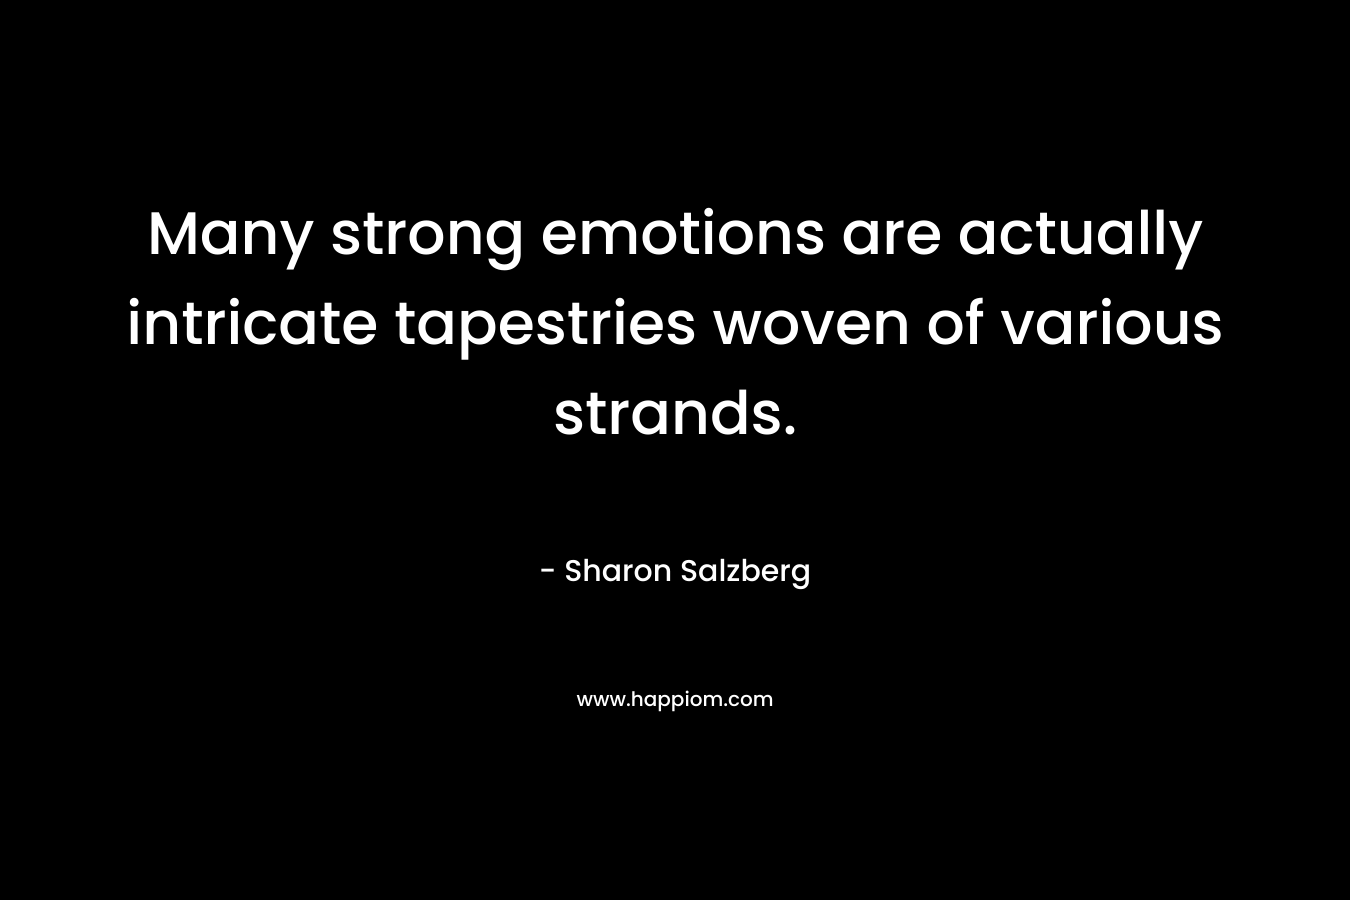 Many strong emotions are actually intricate tapestries woven of various strands. – Sharon Salzberg